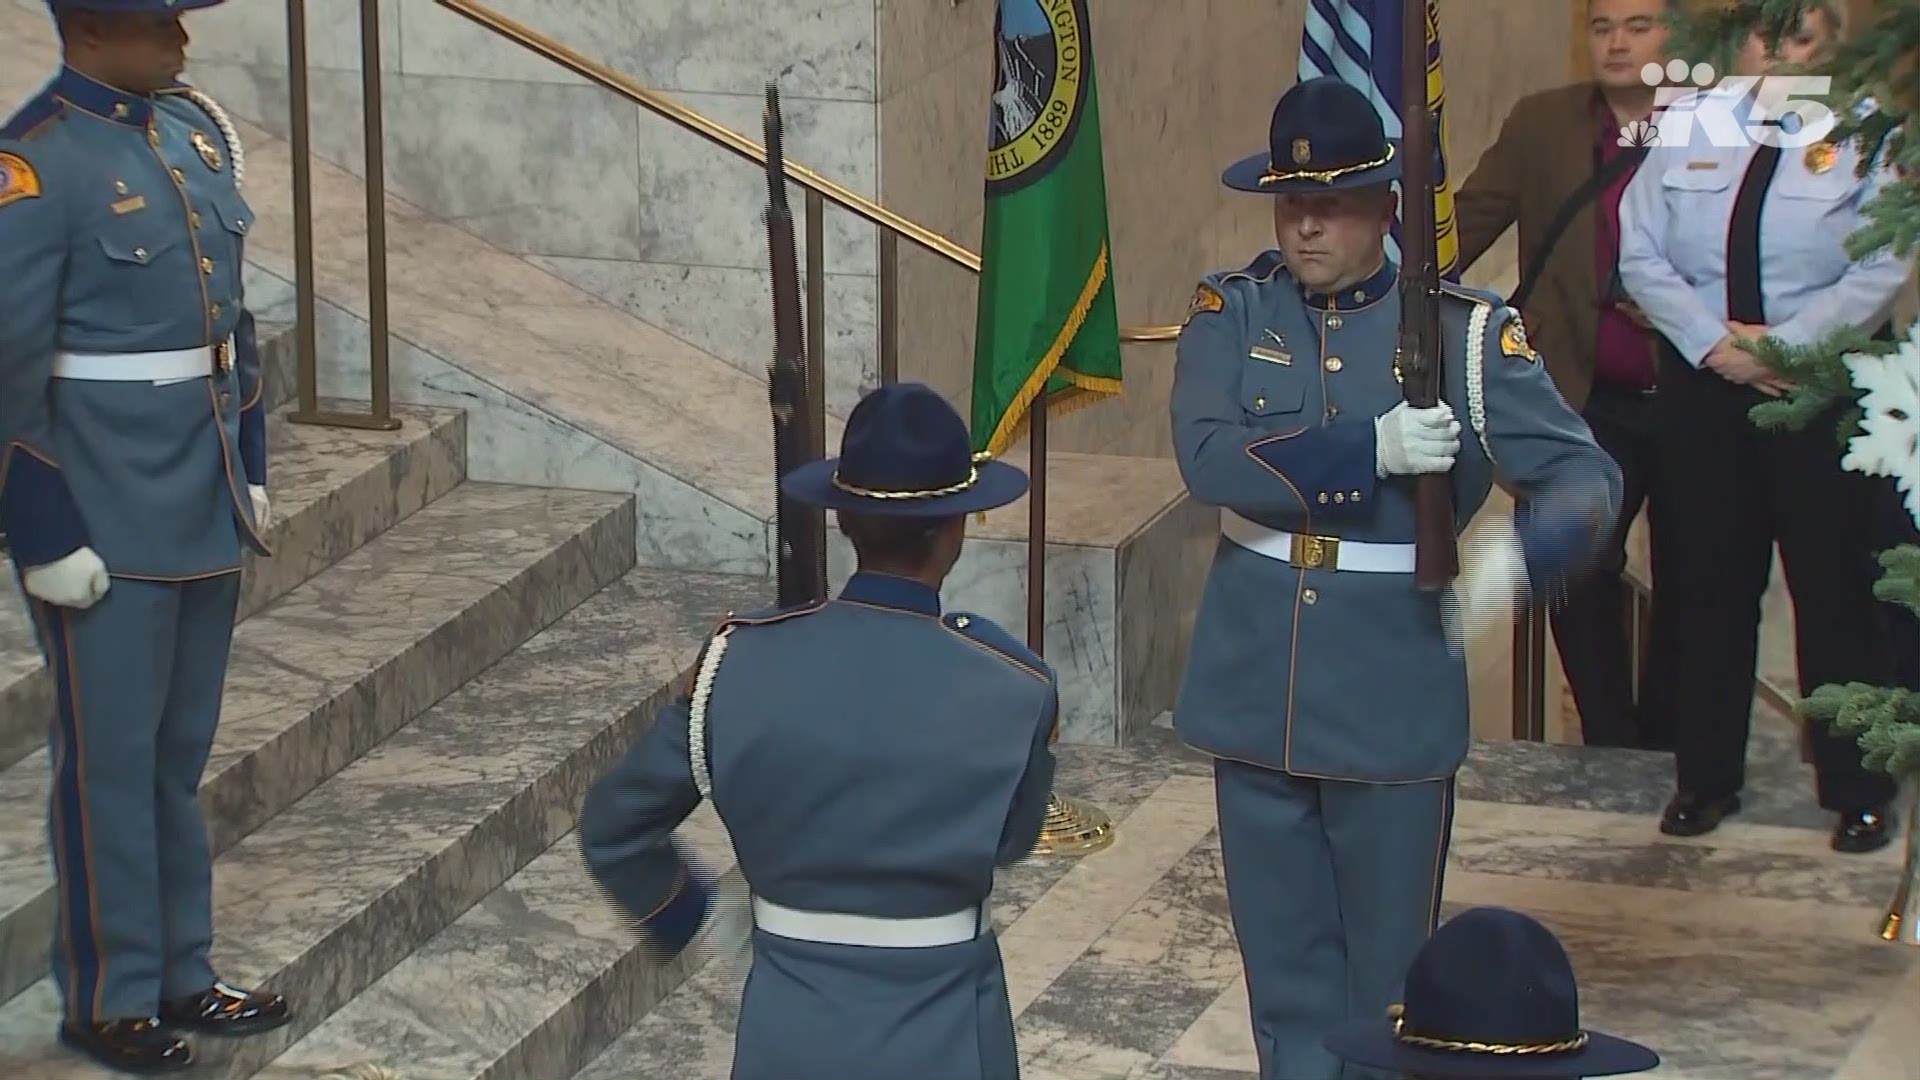 Thirty-one Washington State Patrol troopers were sworn in at the state capitol Thursday in the 110th trooper basic training graduation.